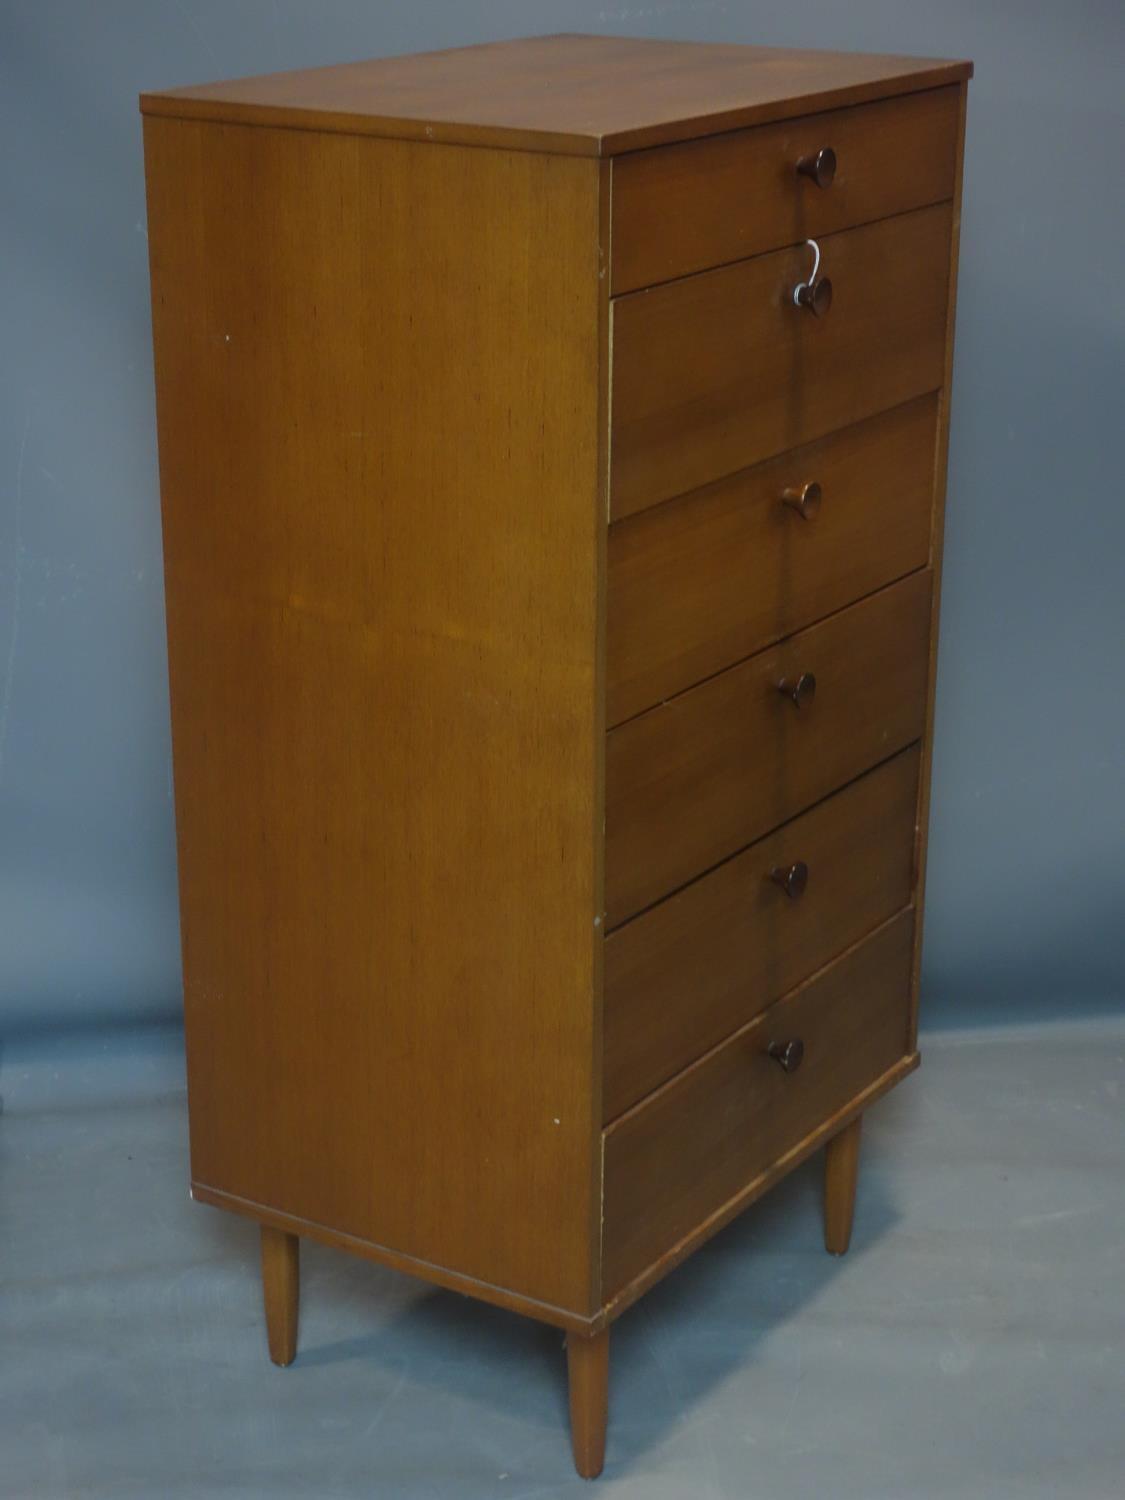 A 20th century teak pedestal chest of 6 drawers, raised on tapered legs, H.118 W.62 D.44cm - Image 2 of 3